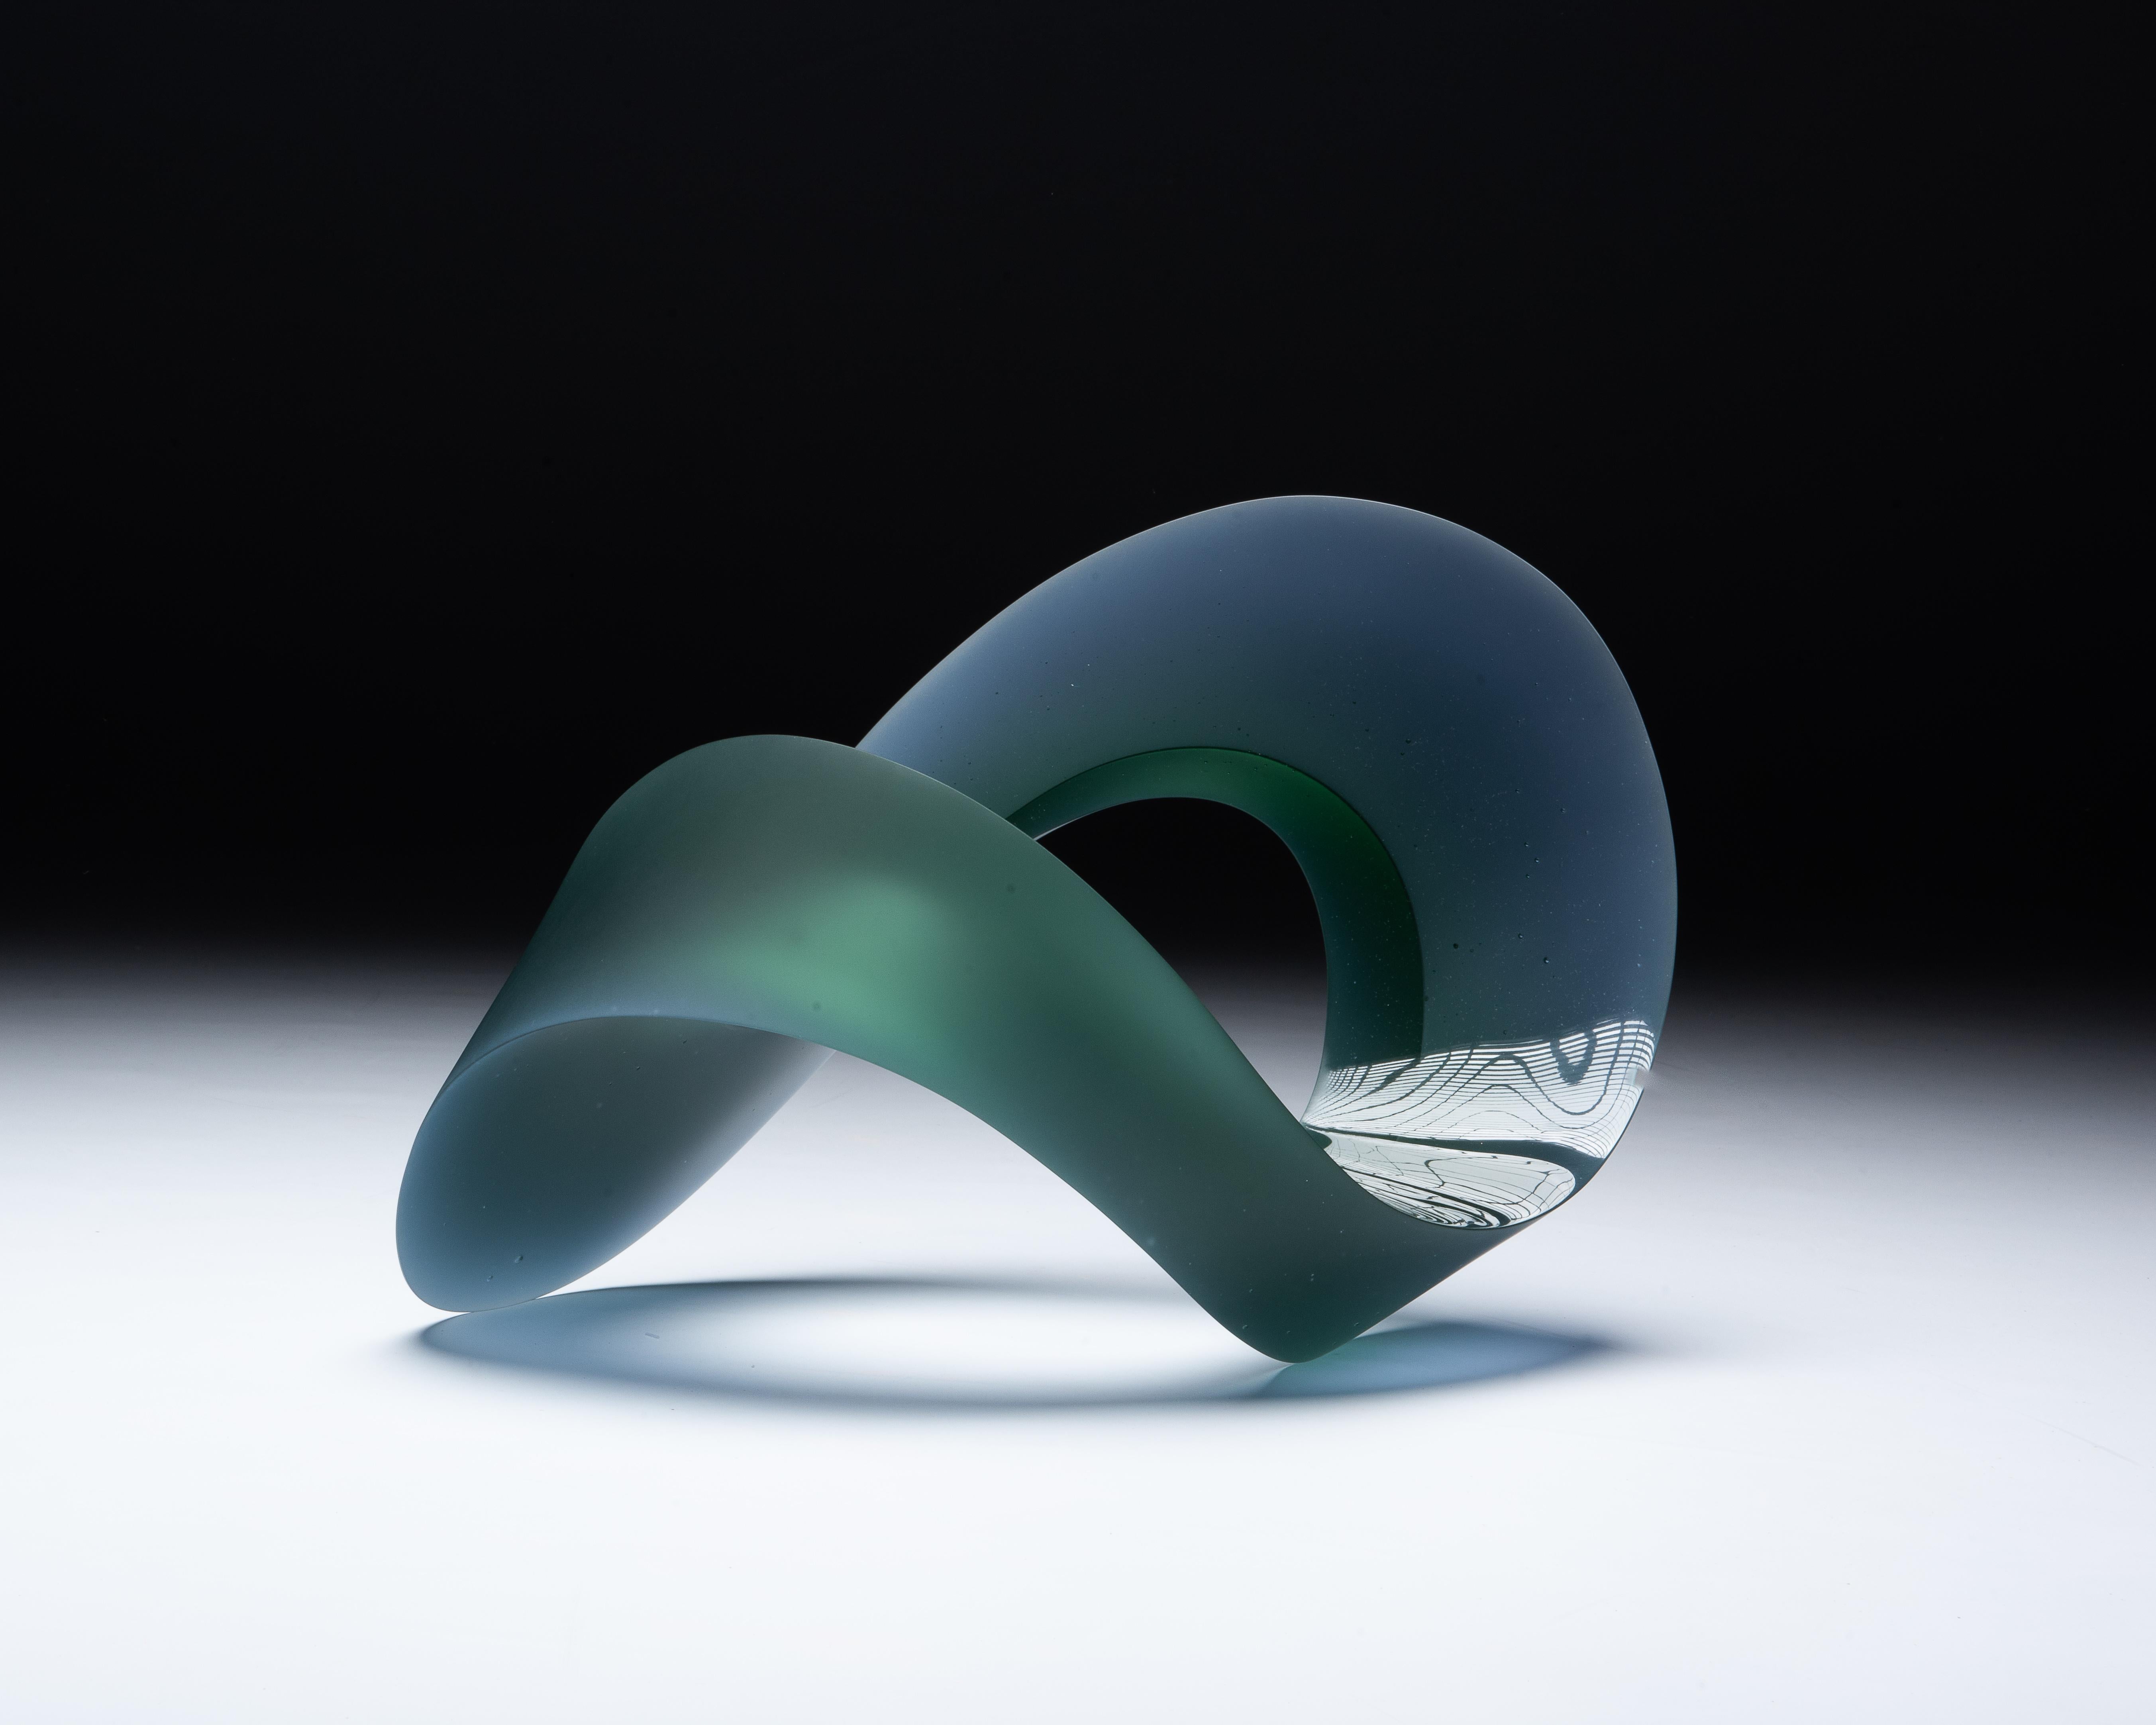 Aurora, 2020 (Glass, C. 11.4 in. h x 17.5 in. w x 14 in. d, Object No.: 4105)

Heike Brachlow was born in Munich, Germany in 1970 and currently lives and works in England. She received her BA in Glass from the University of Wolverhampton in 2004,